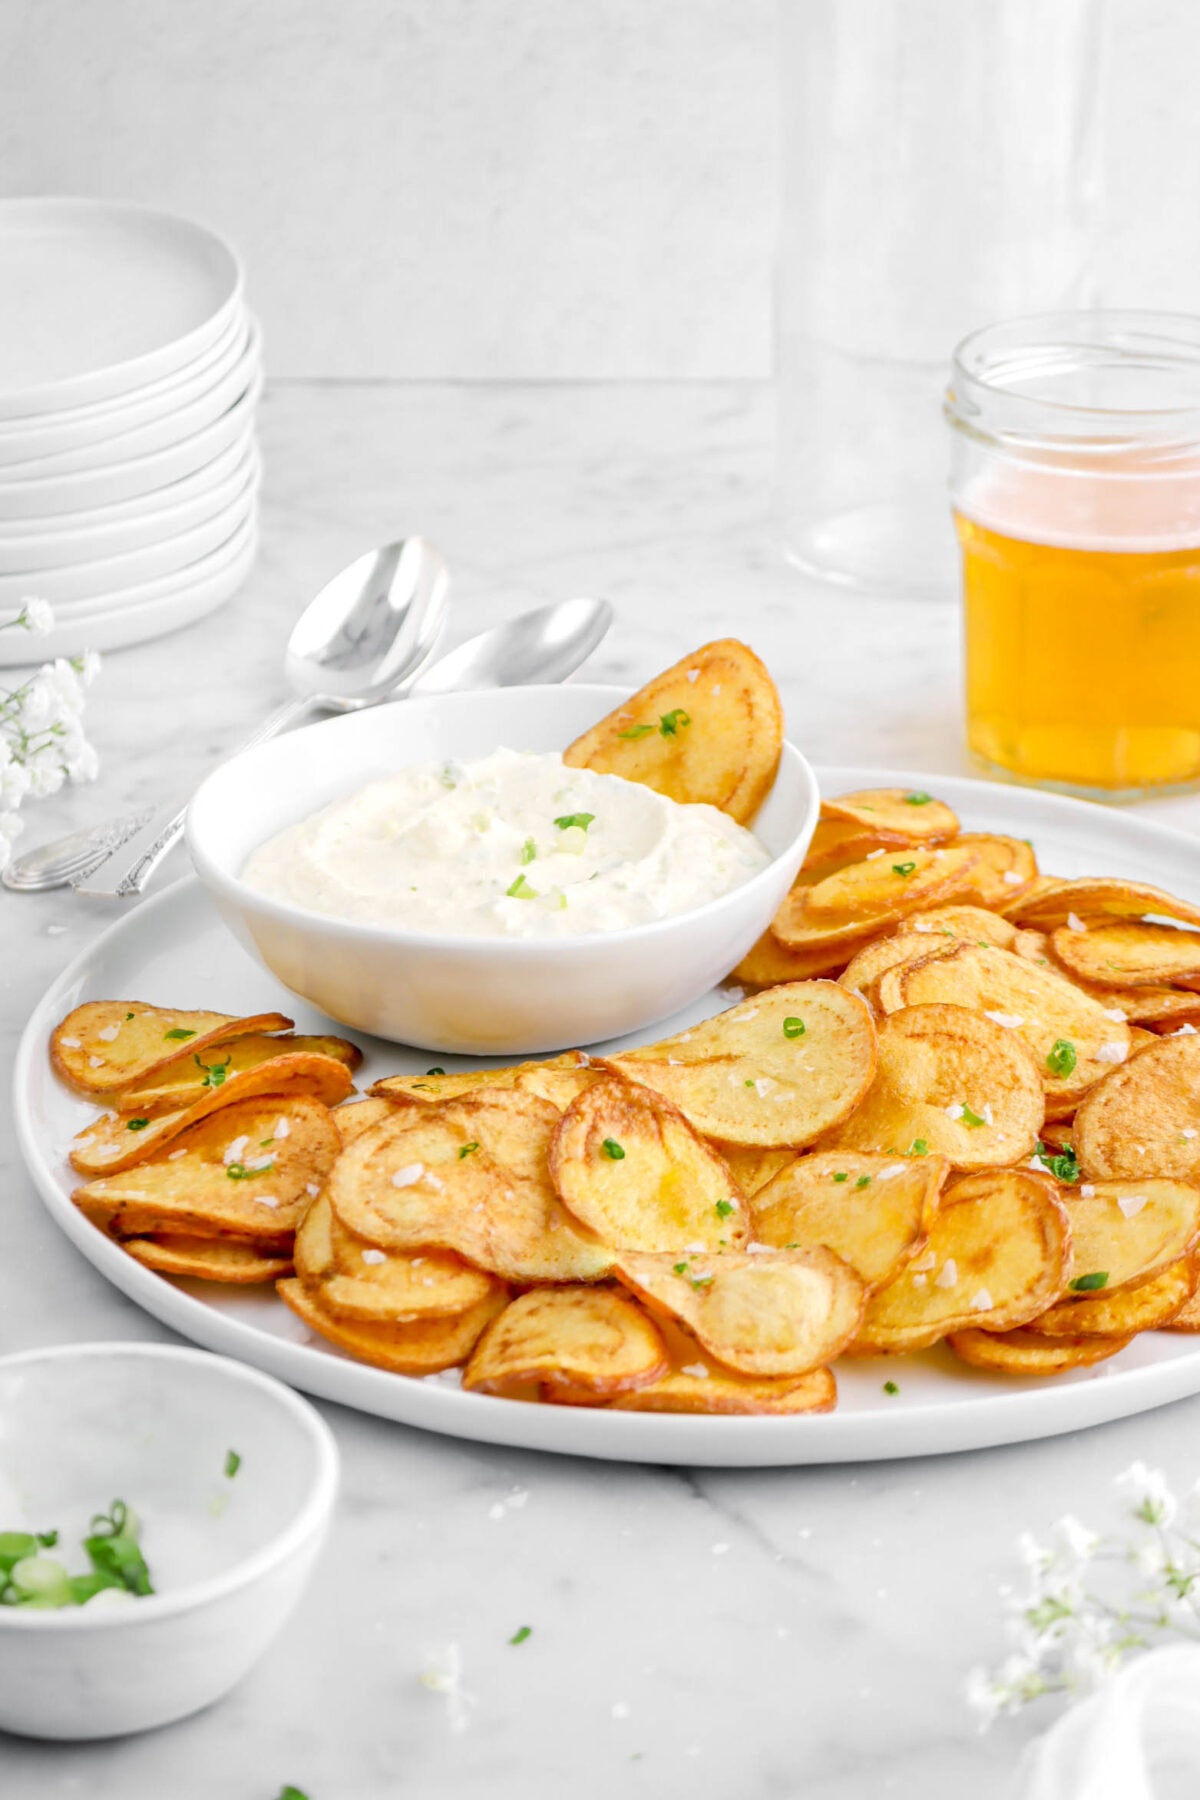 front shot of potaot chips on white plate with white bowl of dip and potato chip dipped in it, glass of jar with beer in it behind, stack of white plates, and bowl of chopped green onions